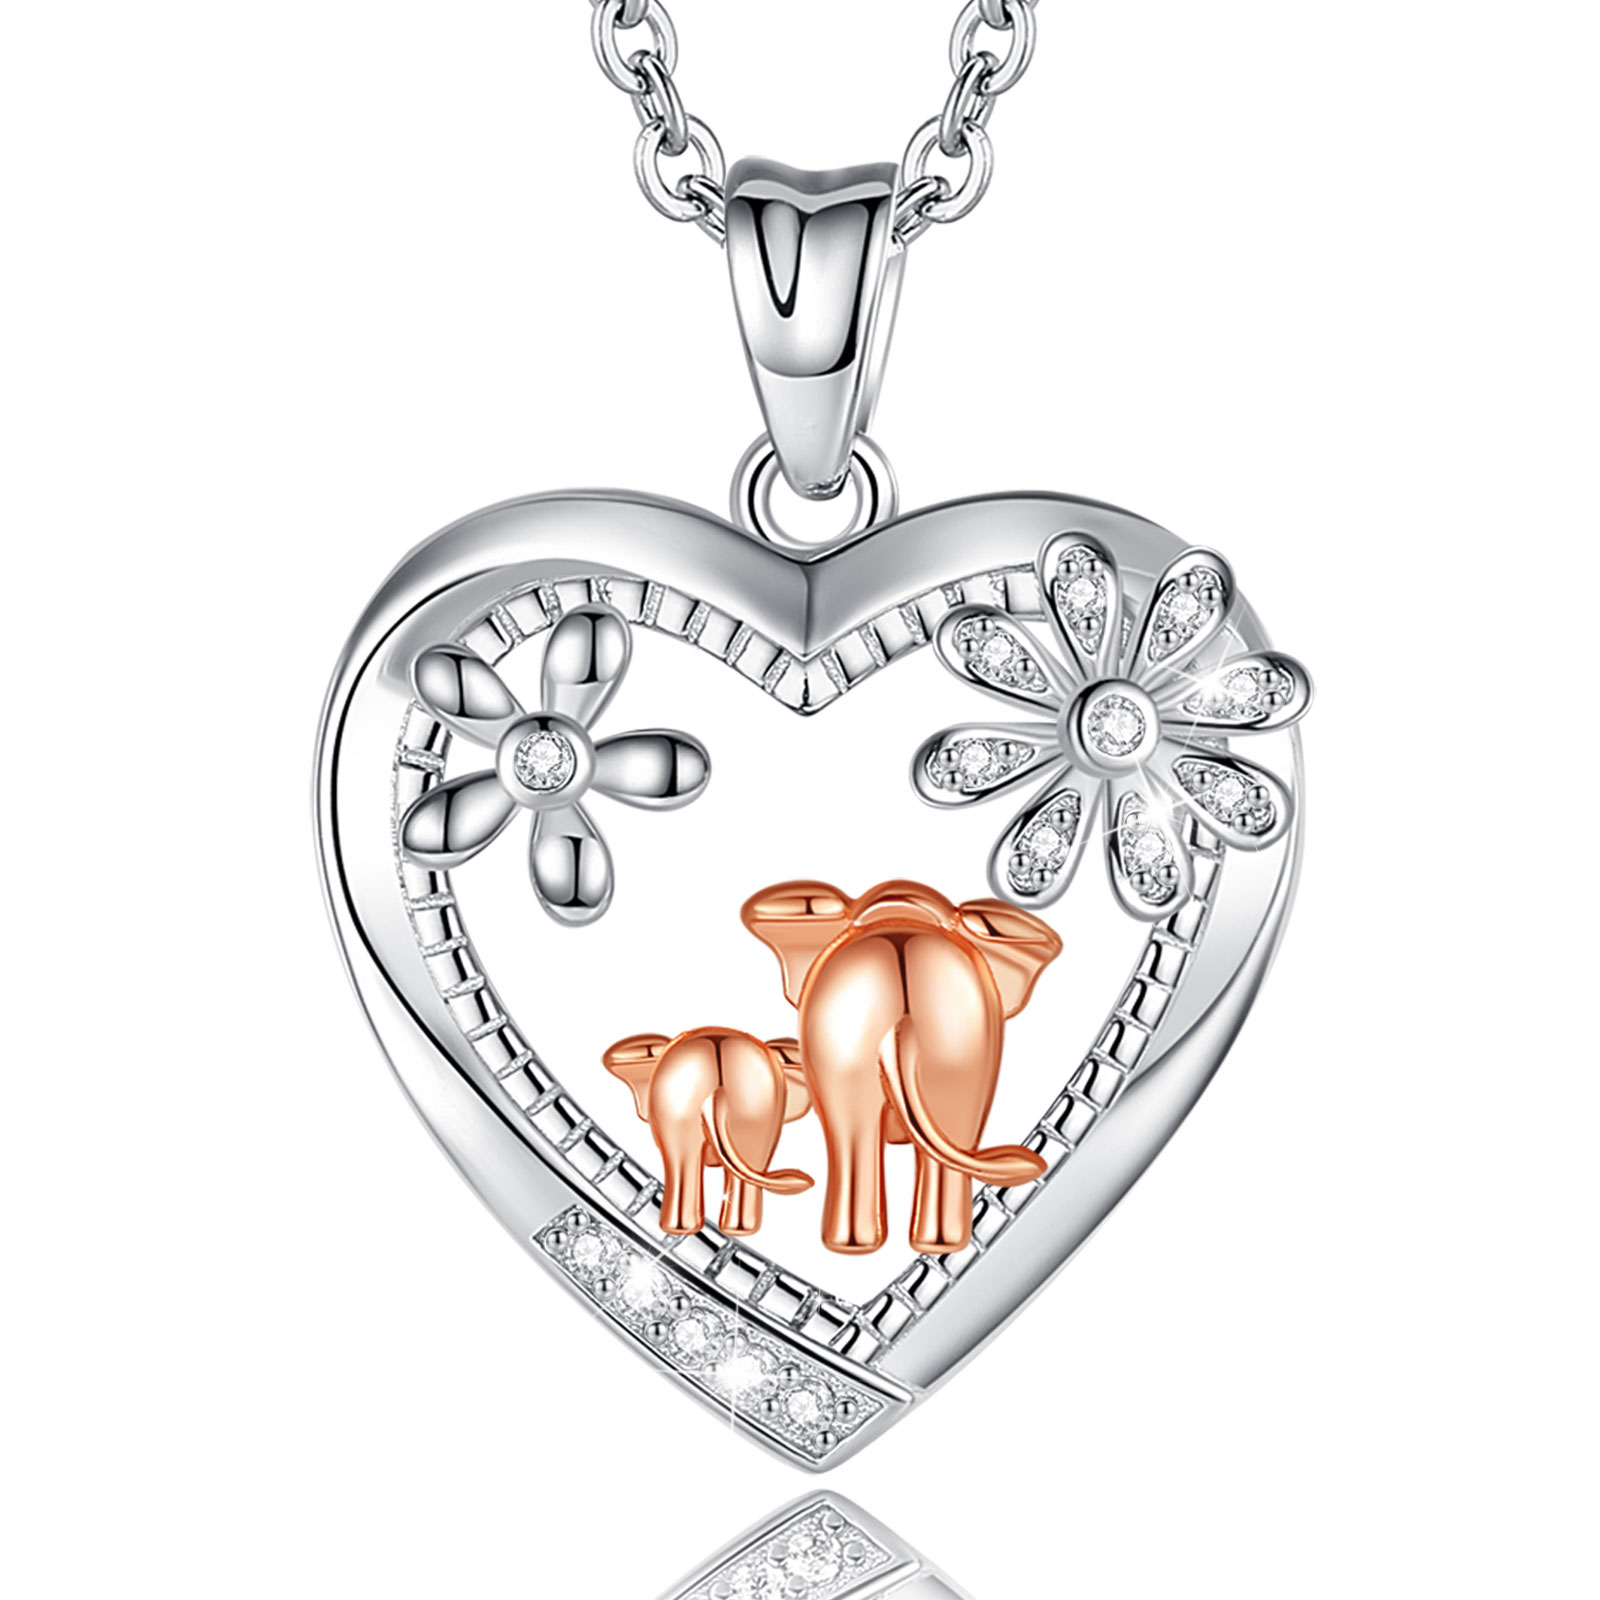 Merryshine Jewelry Wholesale Price S925 Sterling Silver Heart Shaped Elephant Pendant Necklace